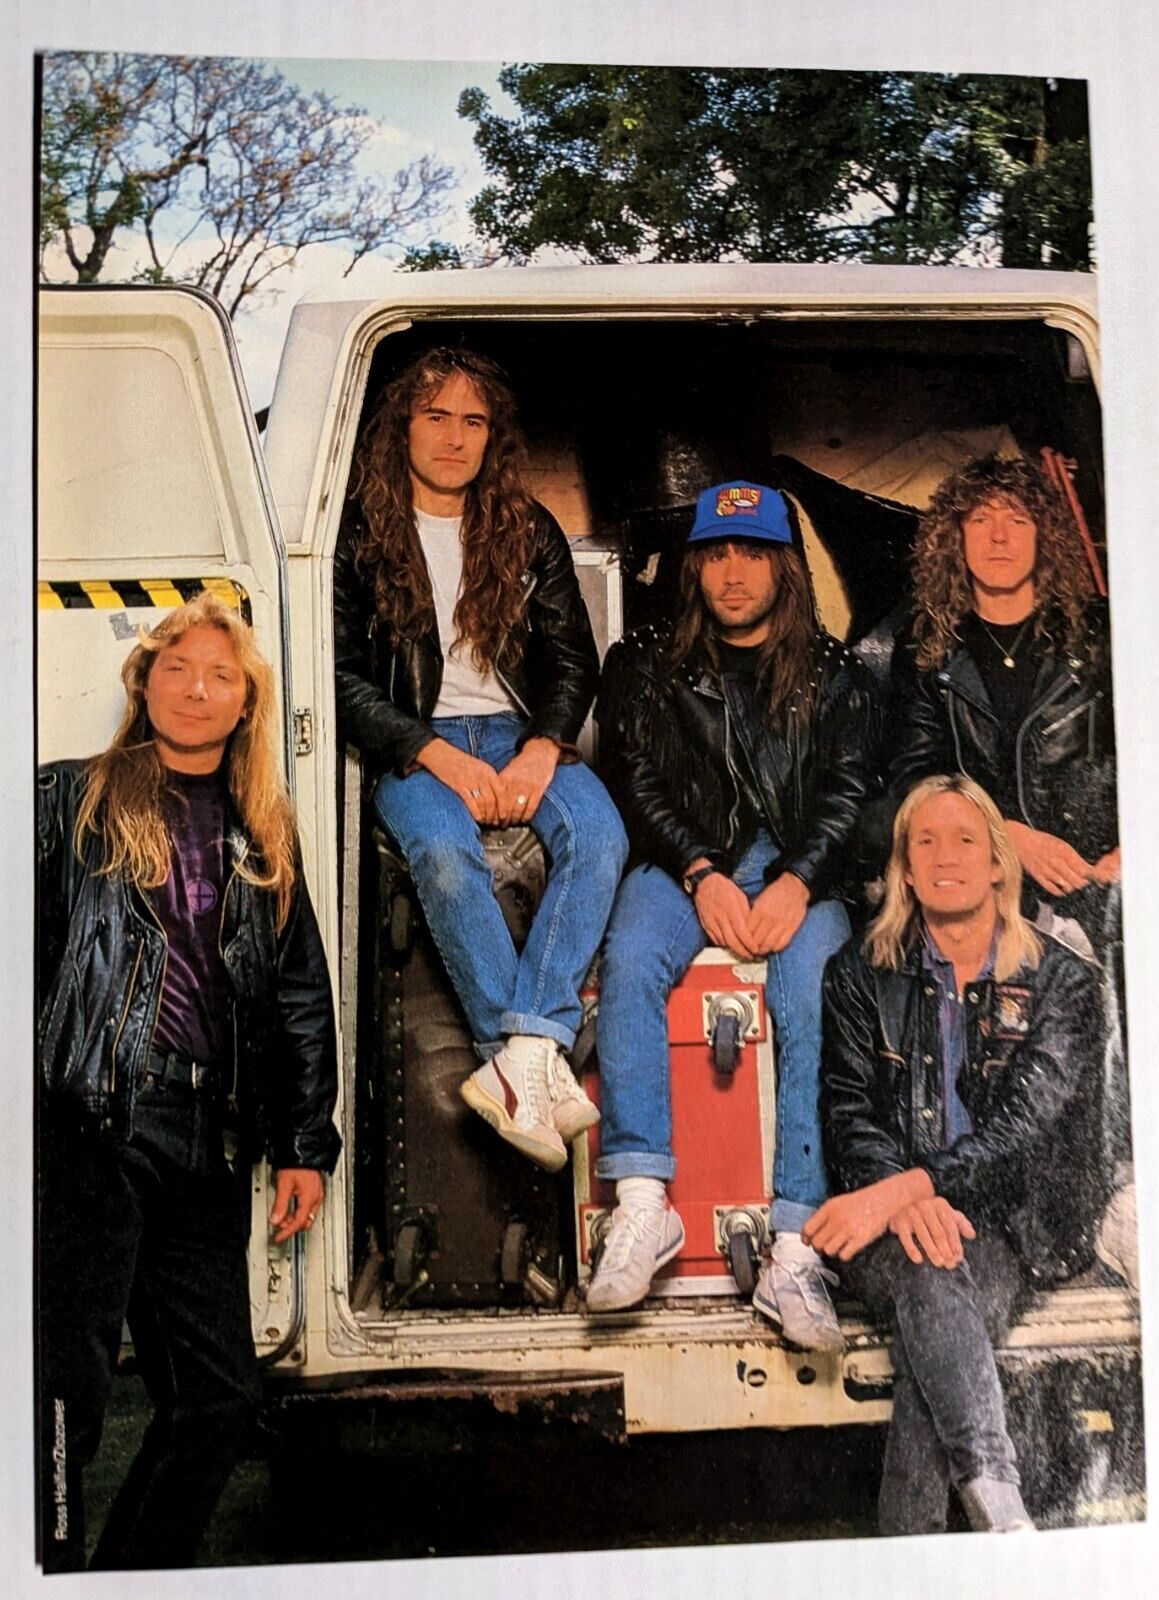 Iron Maiden / Bruce Dickinson Band Magazine Full Page Pinup Poster Clipping (2)